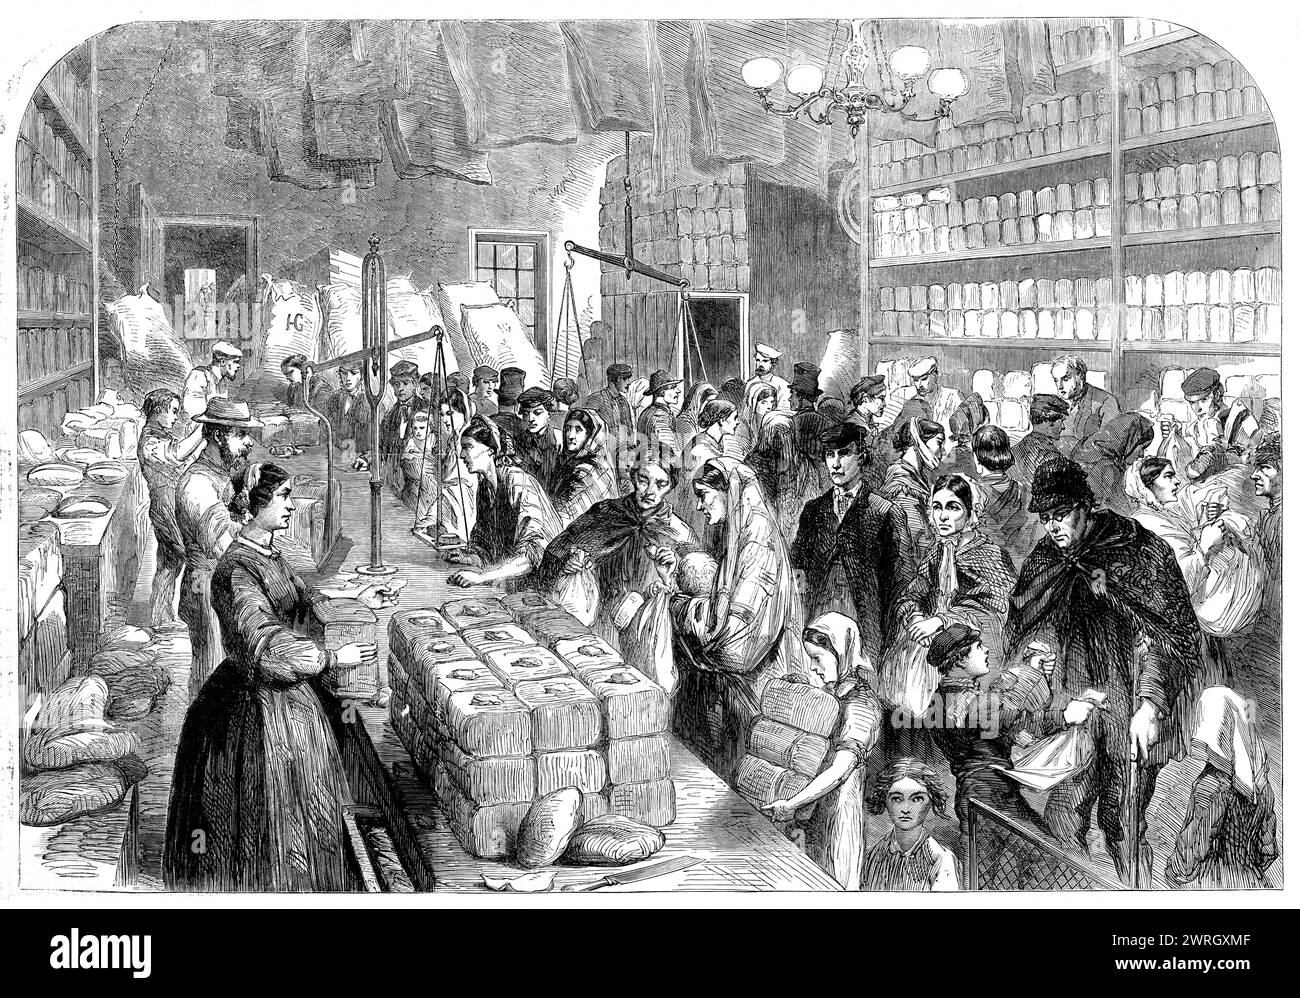 The Cotton Famine: provision-shop where goods are obtained for tickets issued by the Manchester and Salford Provident Society, 1862. Unemployment in Lancashire. 'Tickets for relief, according to the quantities ordered, are delivered by the secretary to the visitors, who carry them to the houses of the recipients, who are thus regularly revisited once a week. The number of cases, persons, and quantities of relief are added up, and the secretary of each ward reports the totals to the general committee at the next meeting, with the equivalent sum of money which he requires for the ensuing week. R Stock Photo